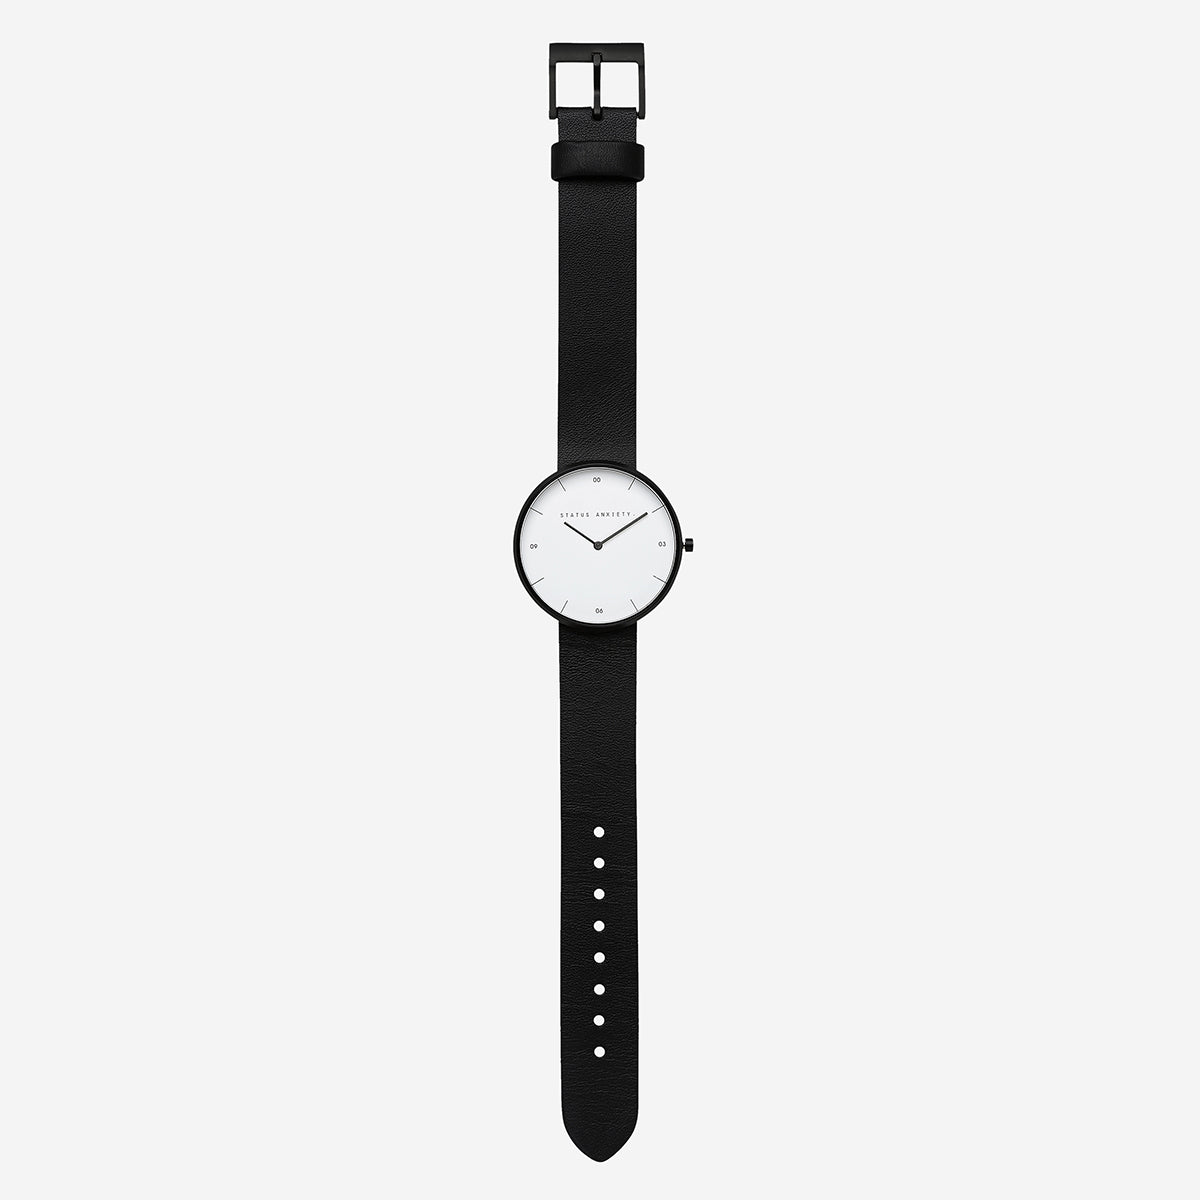 Instrmnt 01-A GM/T Watch by Leibal - Dwell